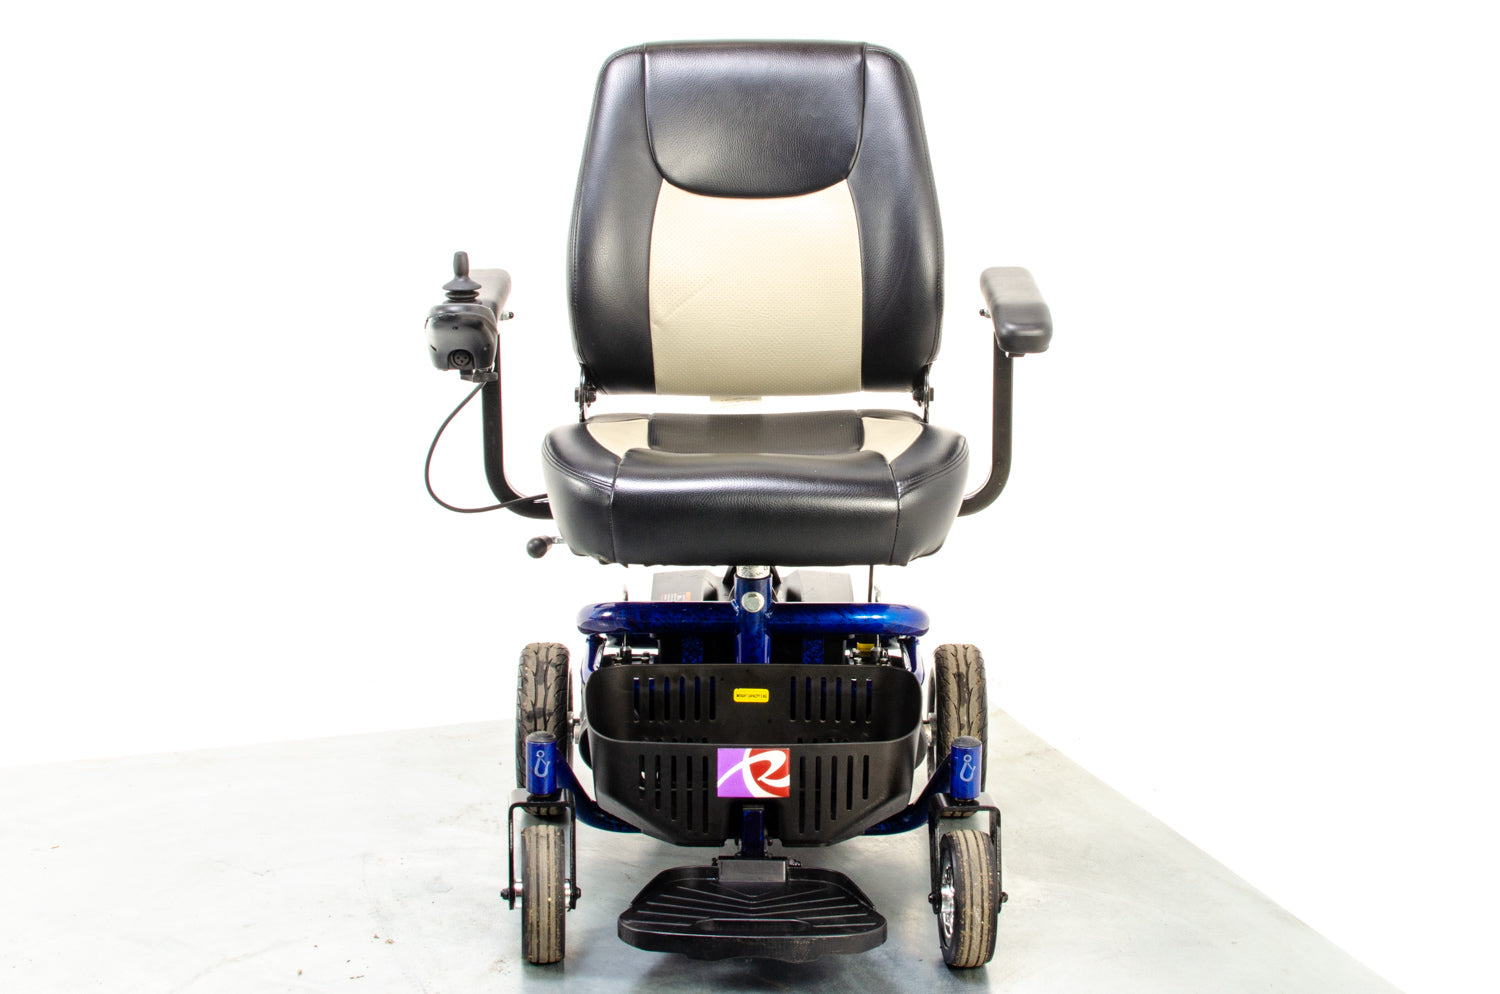 Roma Reno Elite Captain Seat Used Power-Chair Transportable Electric Wheelchair Indoor Blue